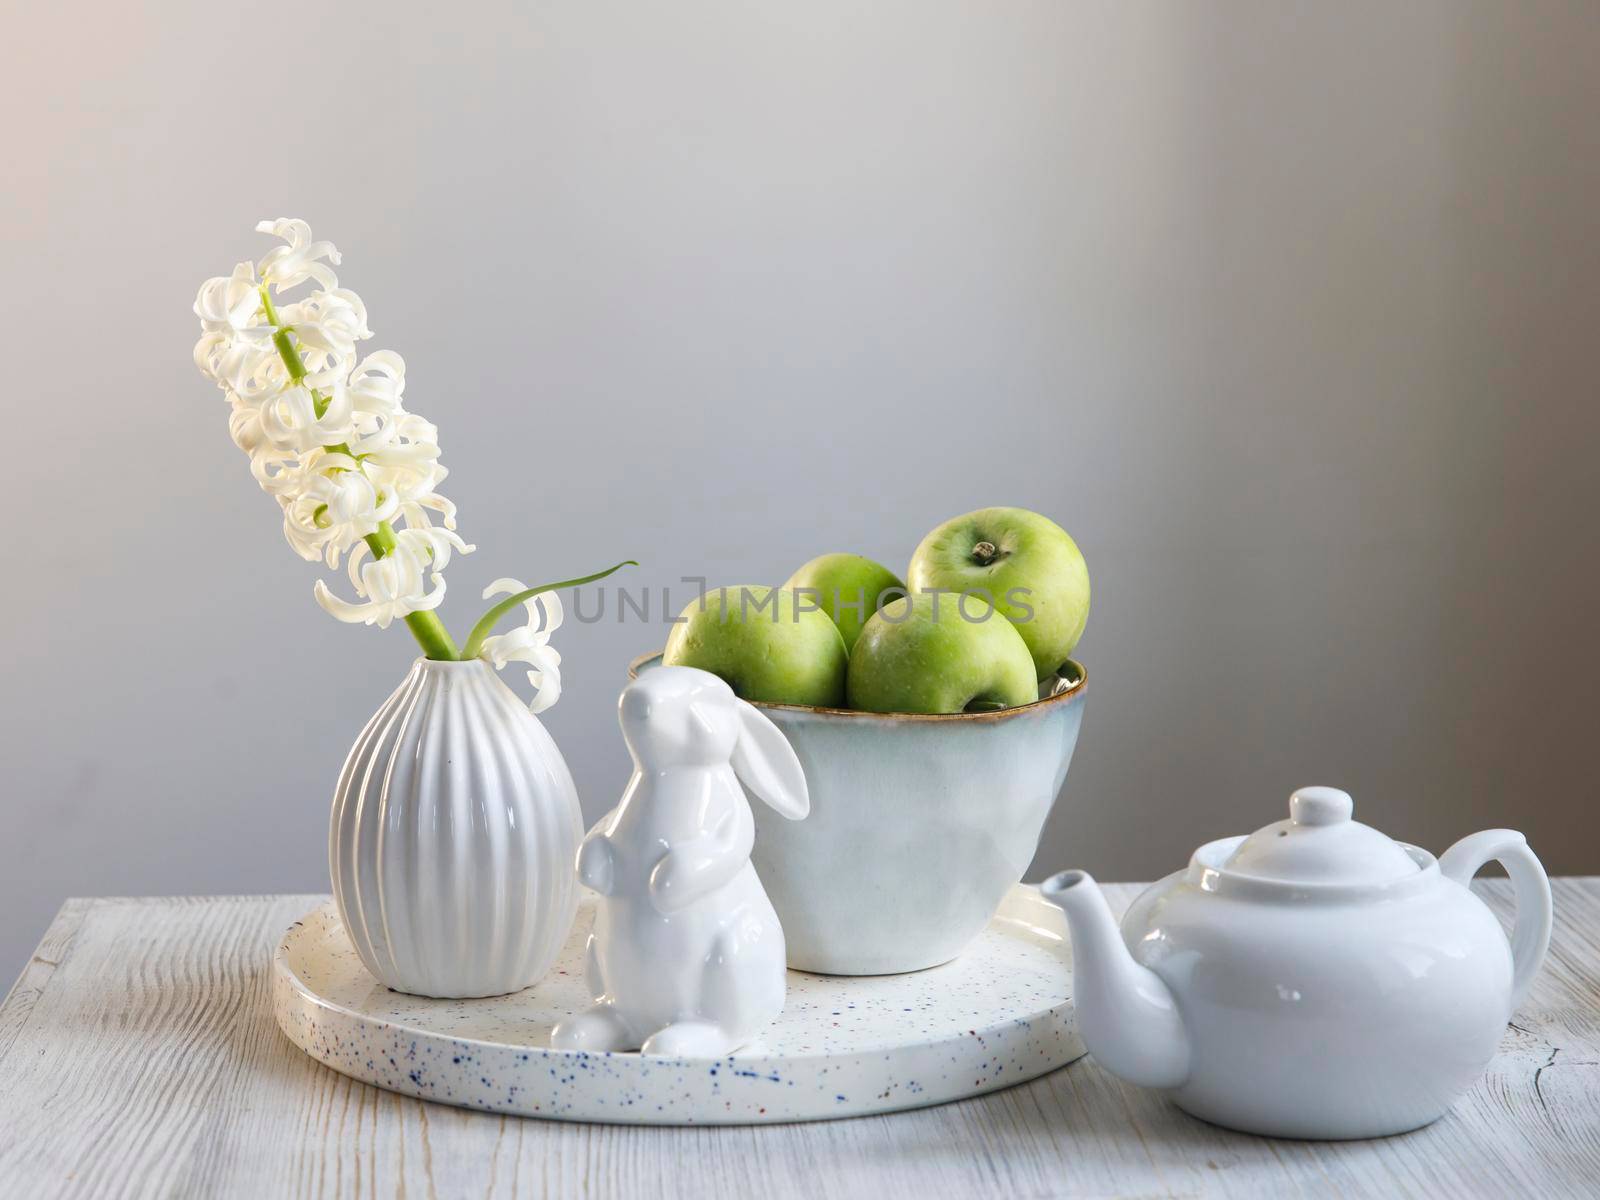 A white hyacinth in a 70s-style fluted vase next to a tray with a large bowl of green apples, an Easter china bunny and a teapot is on the table. Minimalism. Scandinavian style.